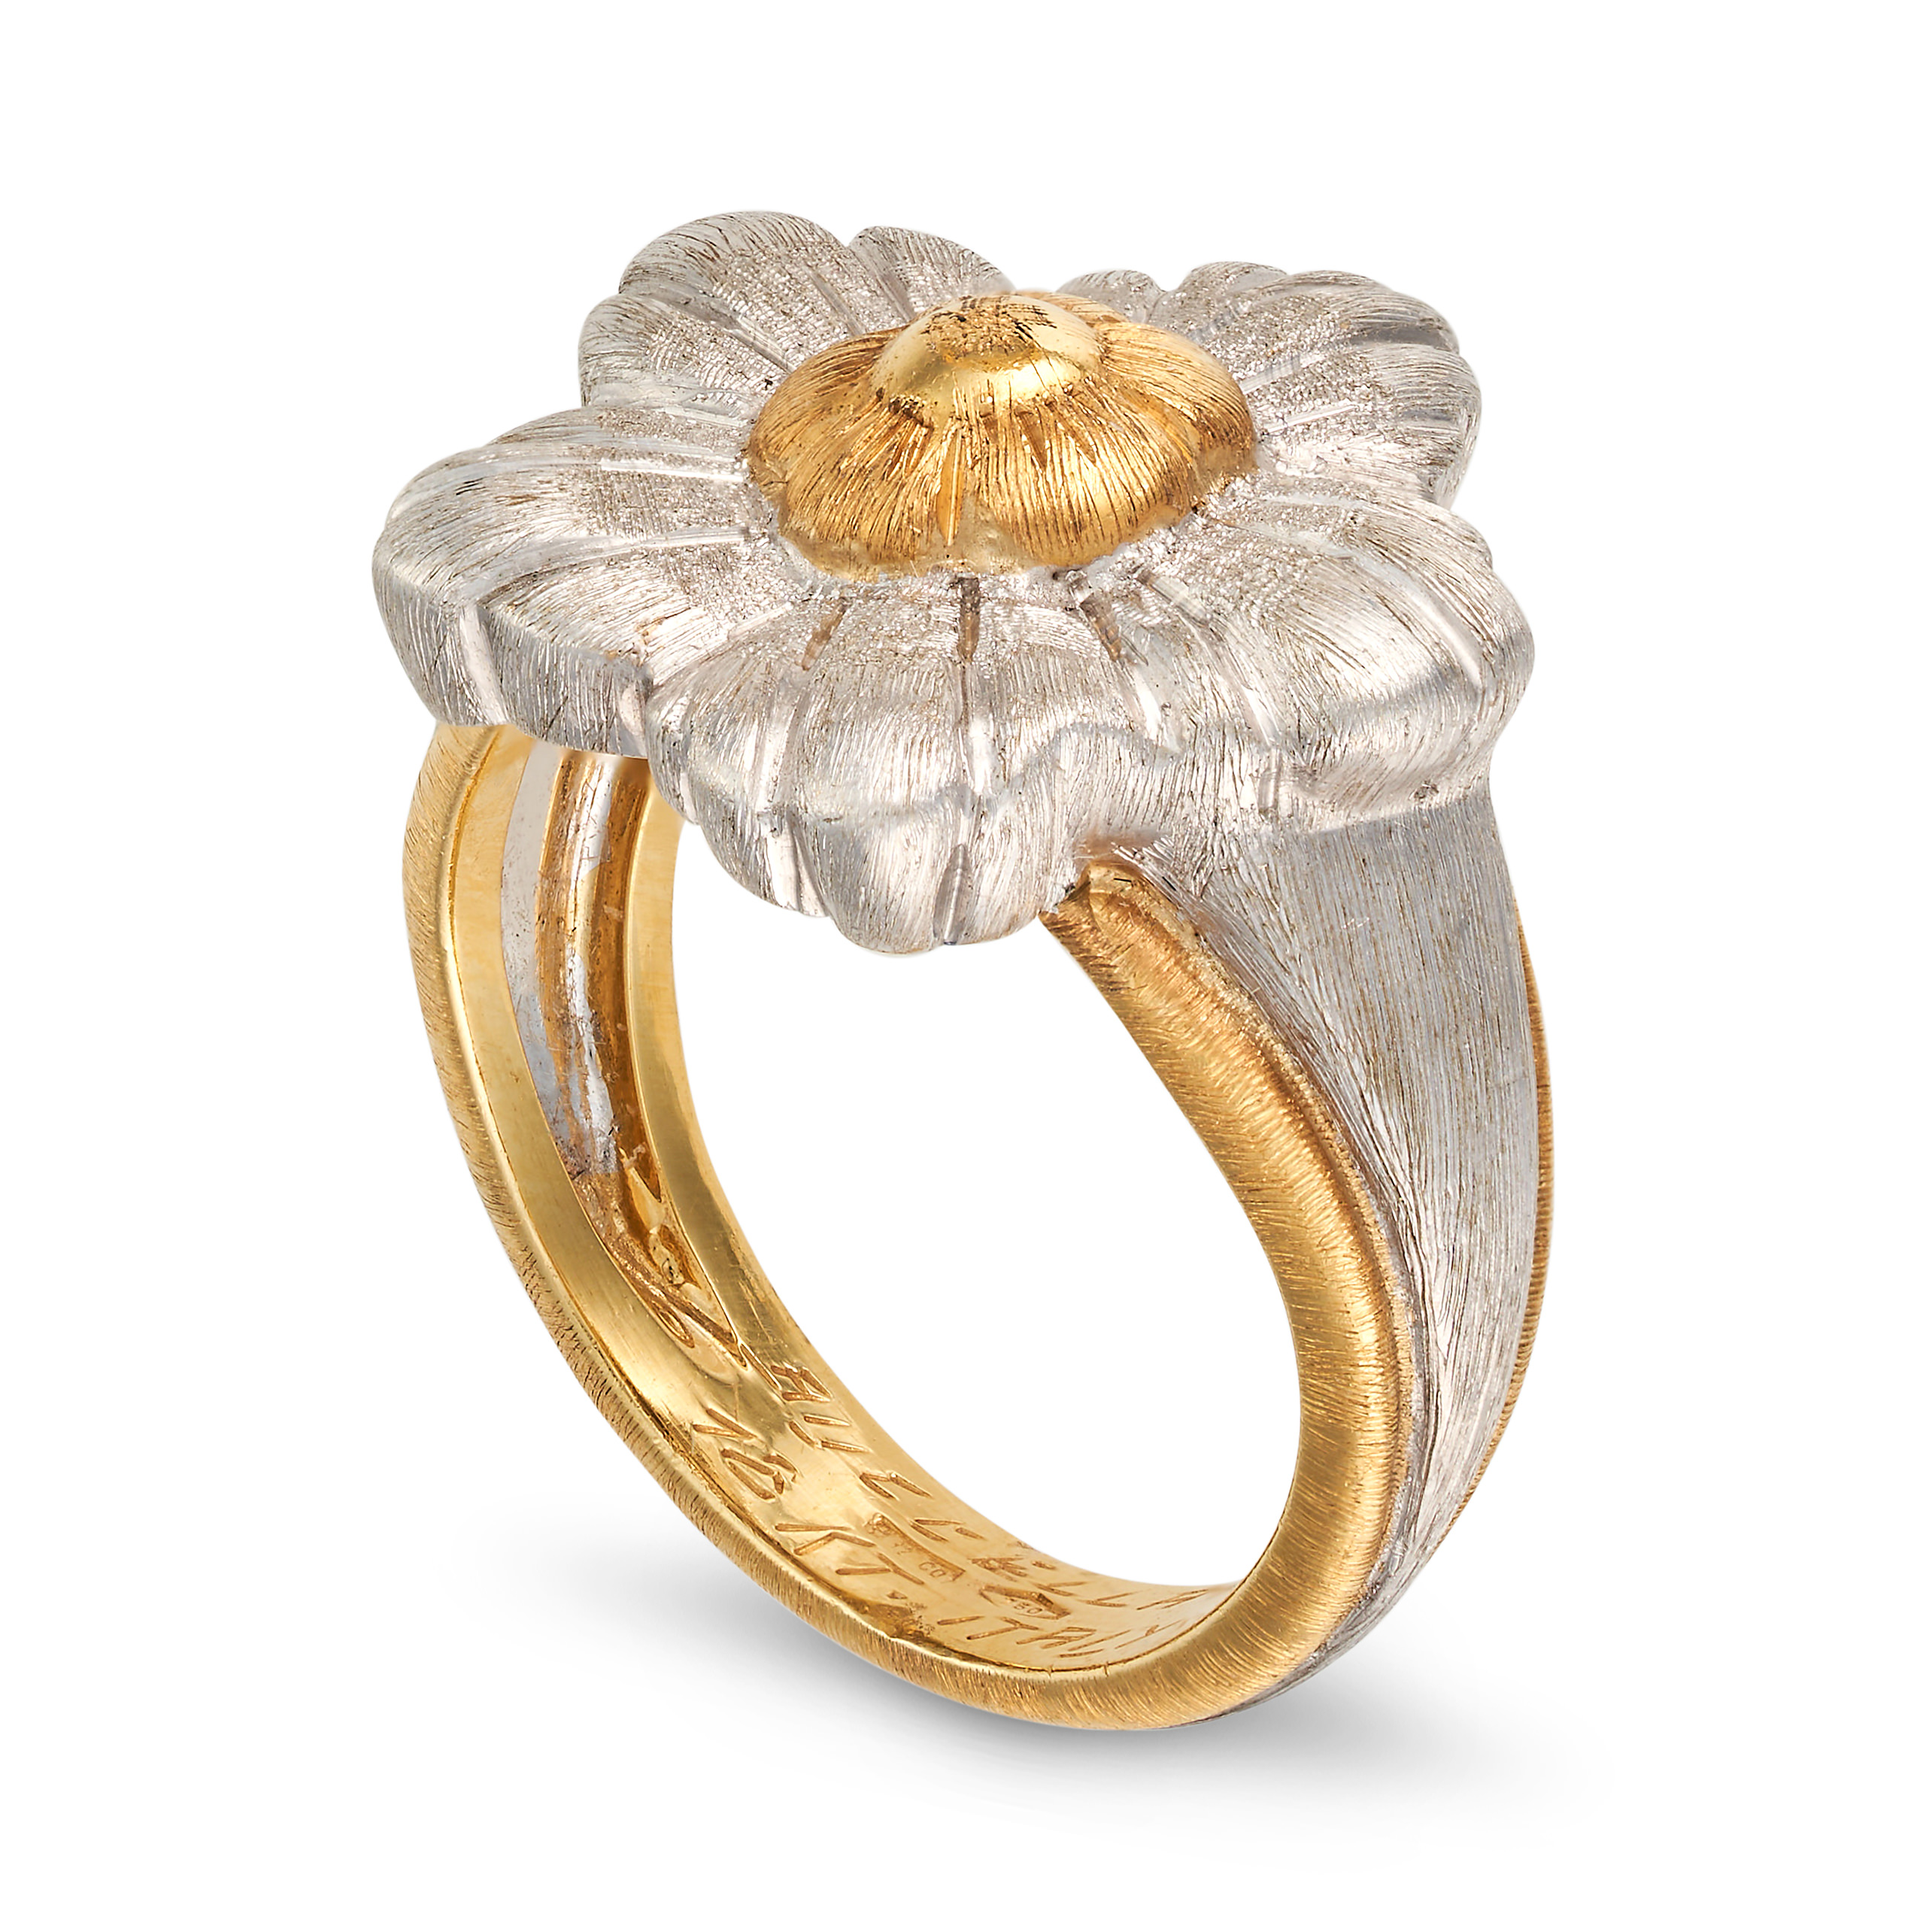 BUCCELLATI, A GOLD FLOWER RING designed as a flower head, signed Buccellati, stamped 18KT 750, si... - Image 2 of 2